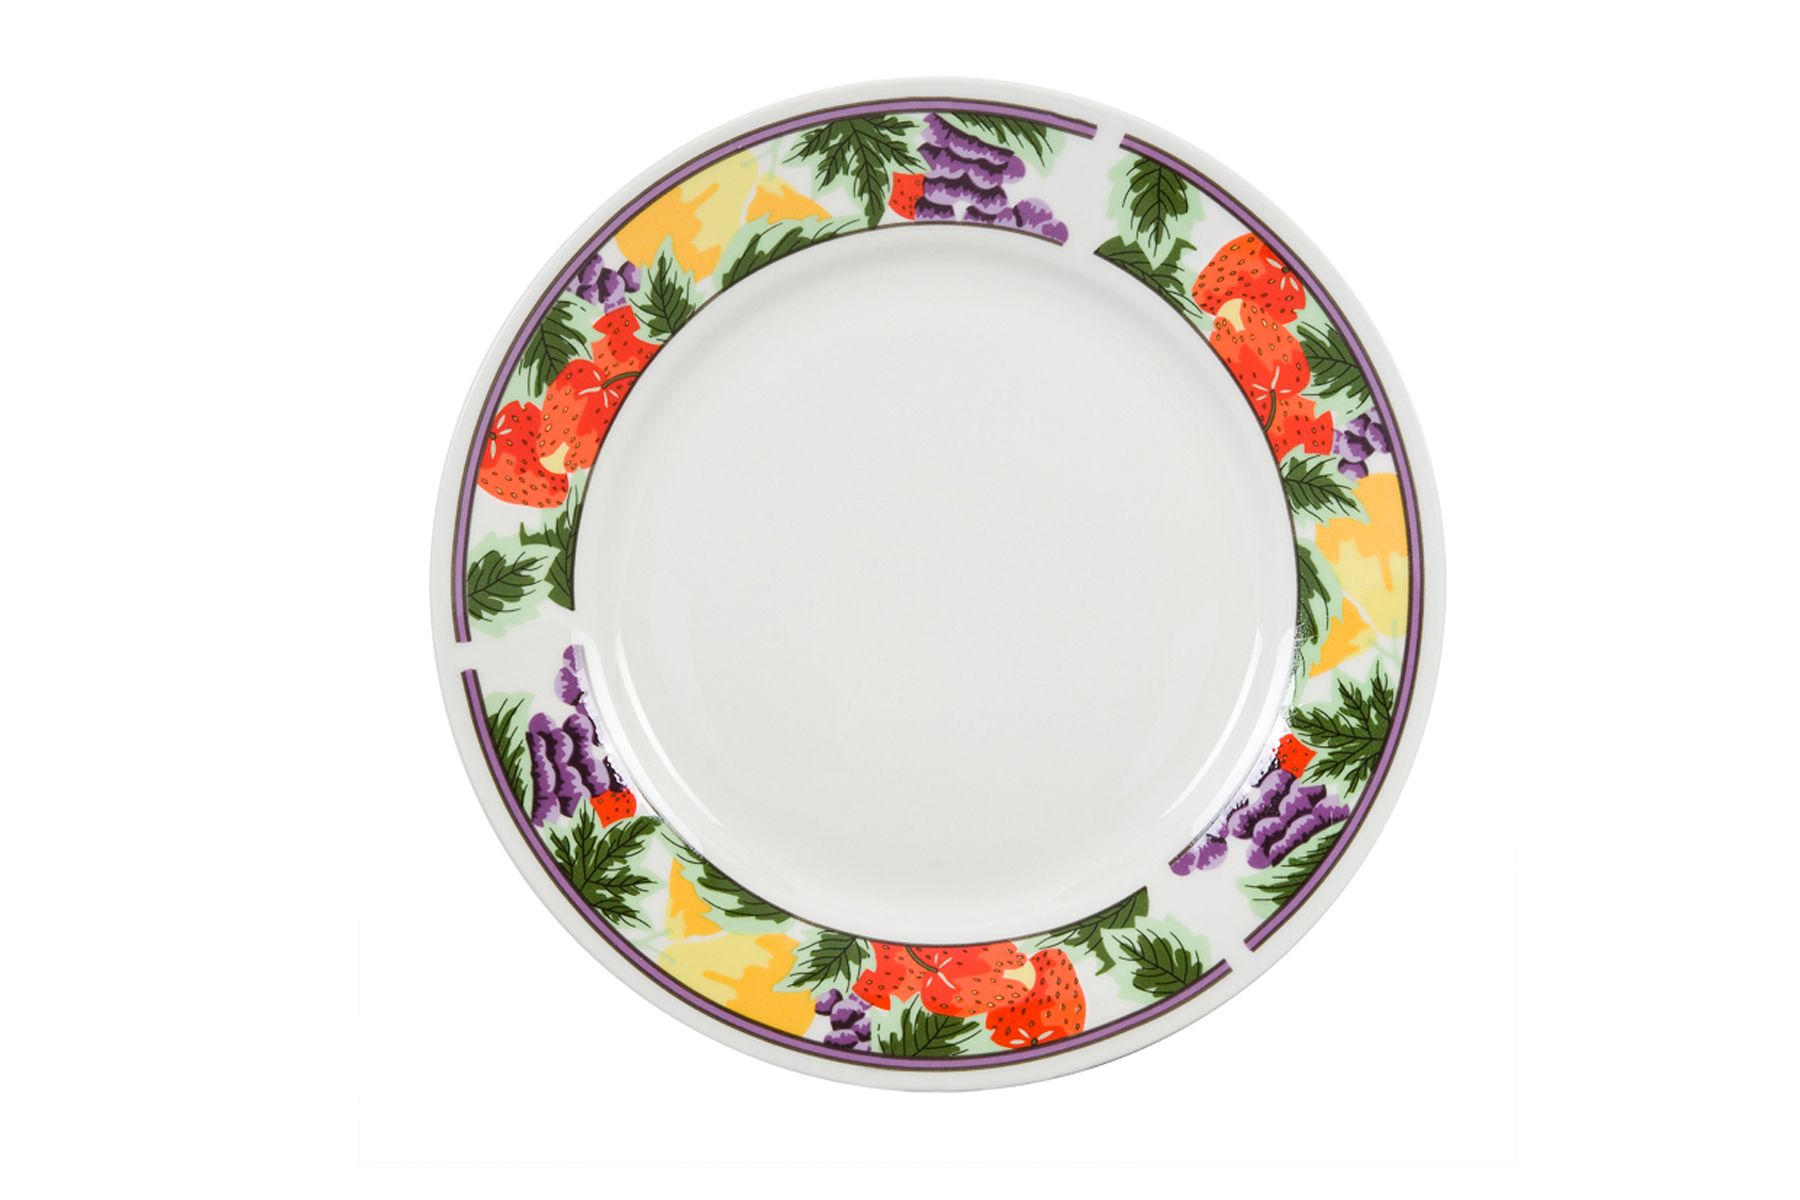 8" Plate with Fruits